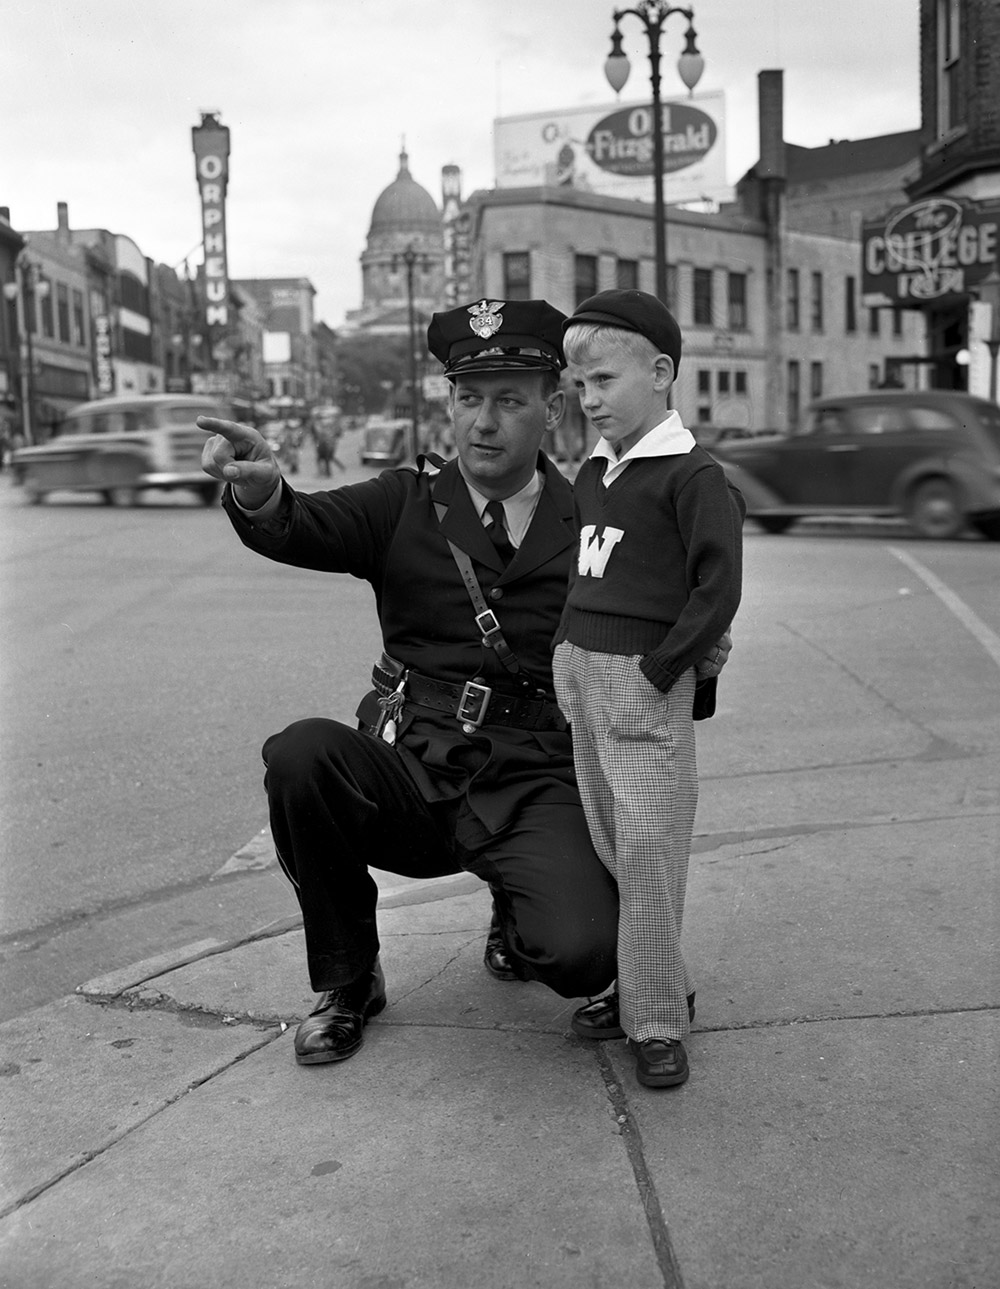 In 1949, Officer Hector Naze poses with a seven-year-old Milverstedt on a State Street corner in Madison, WI